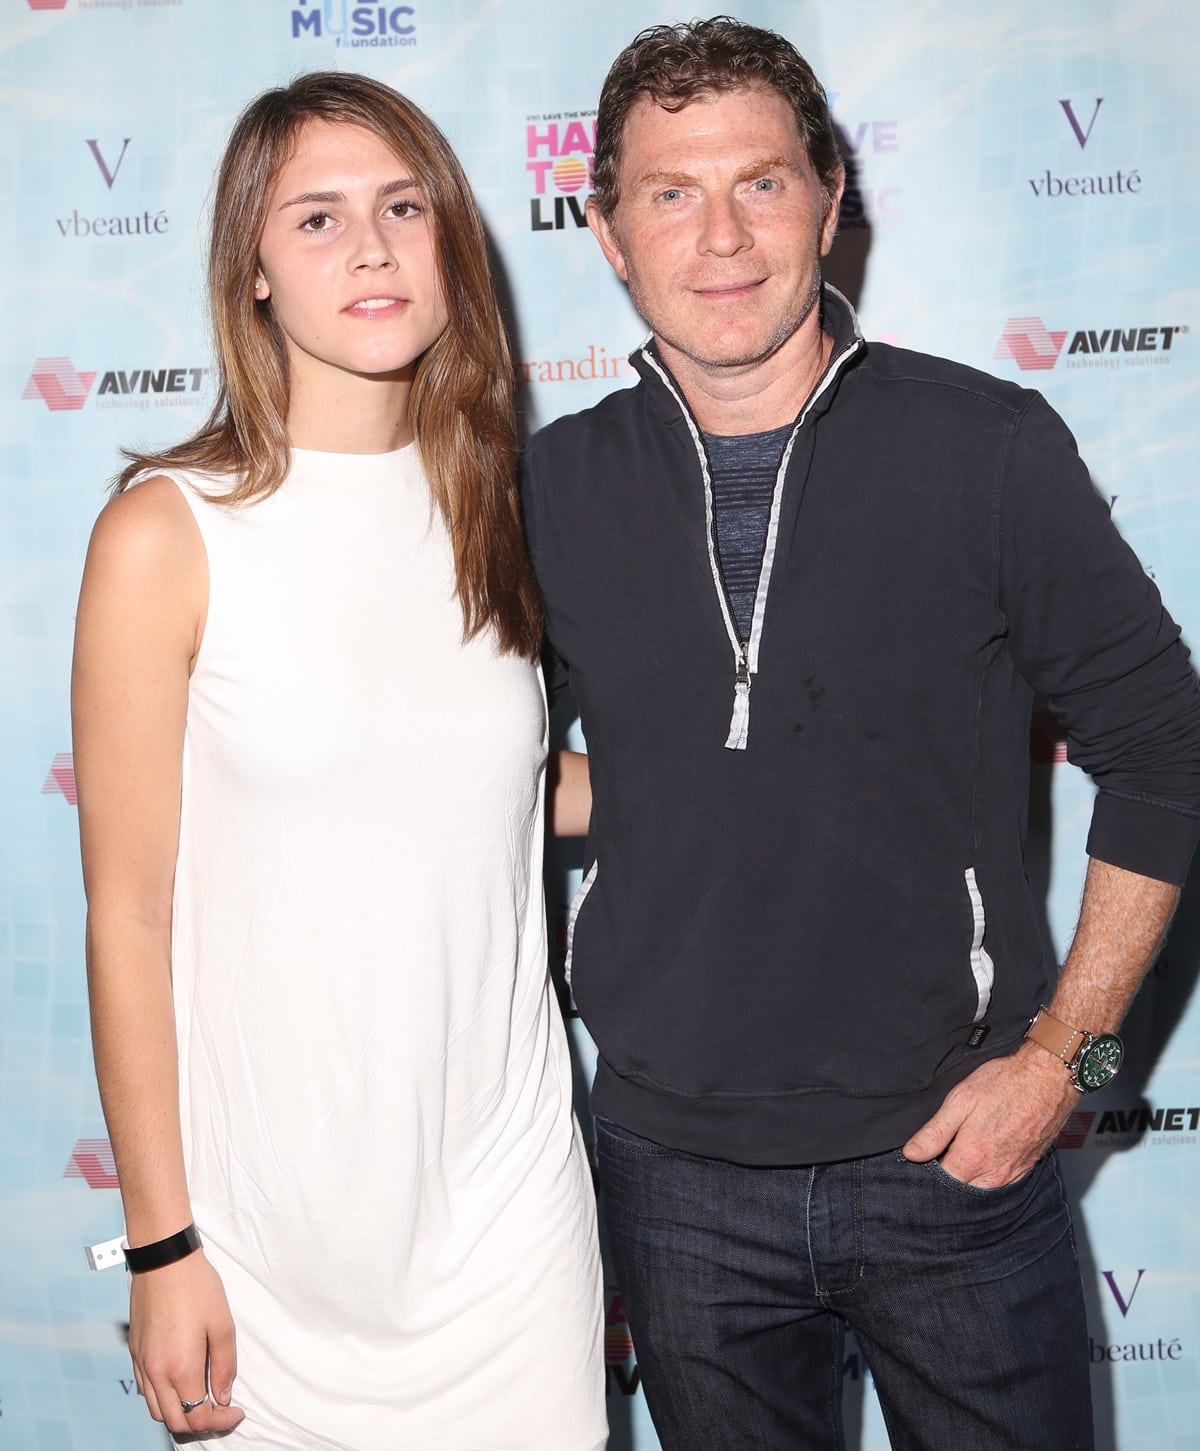 A community journalist for ABC7, Sophie Flay is the daughter of culinary icon Bobby Flay